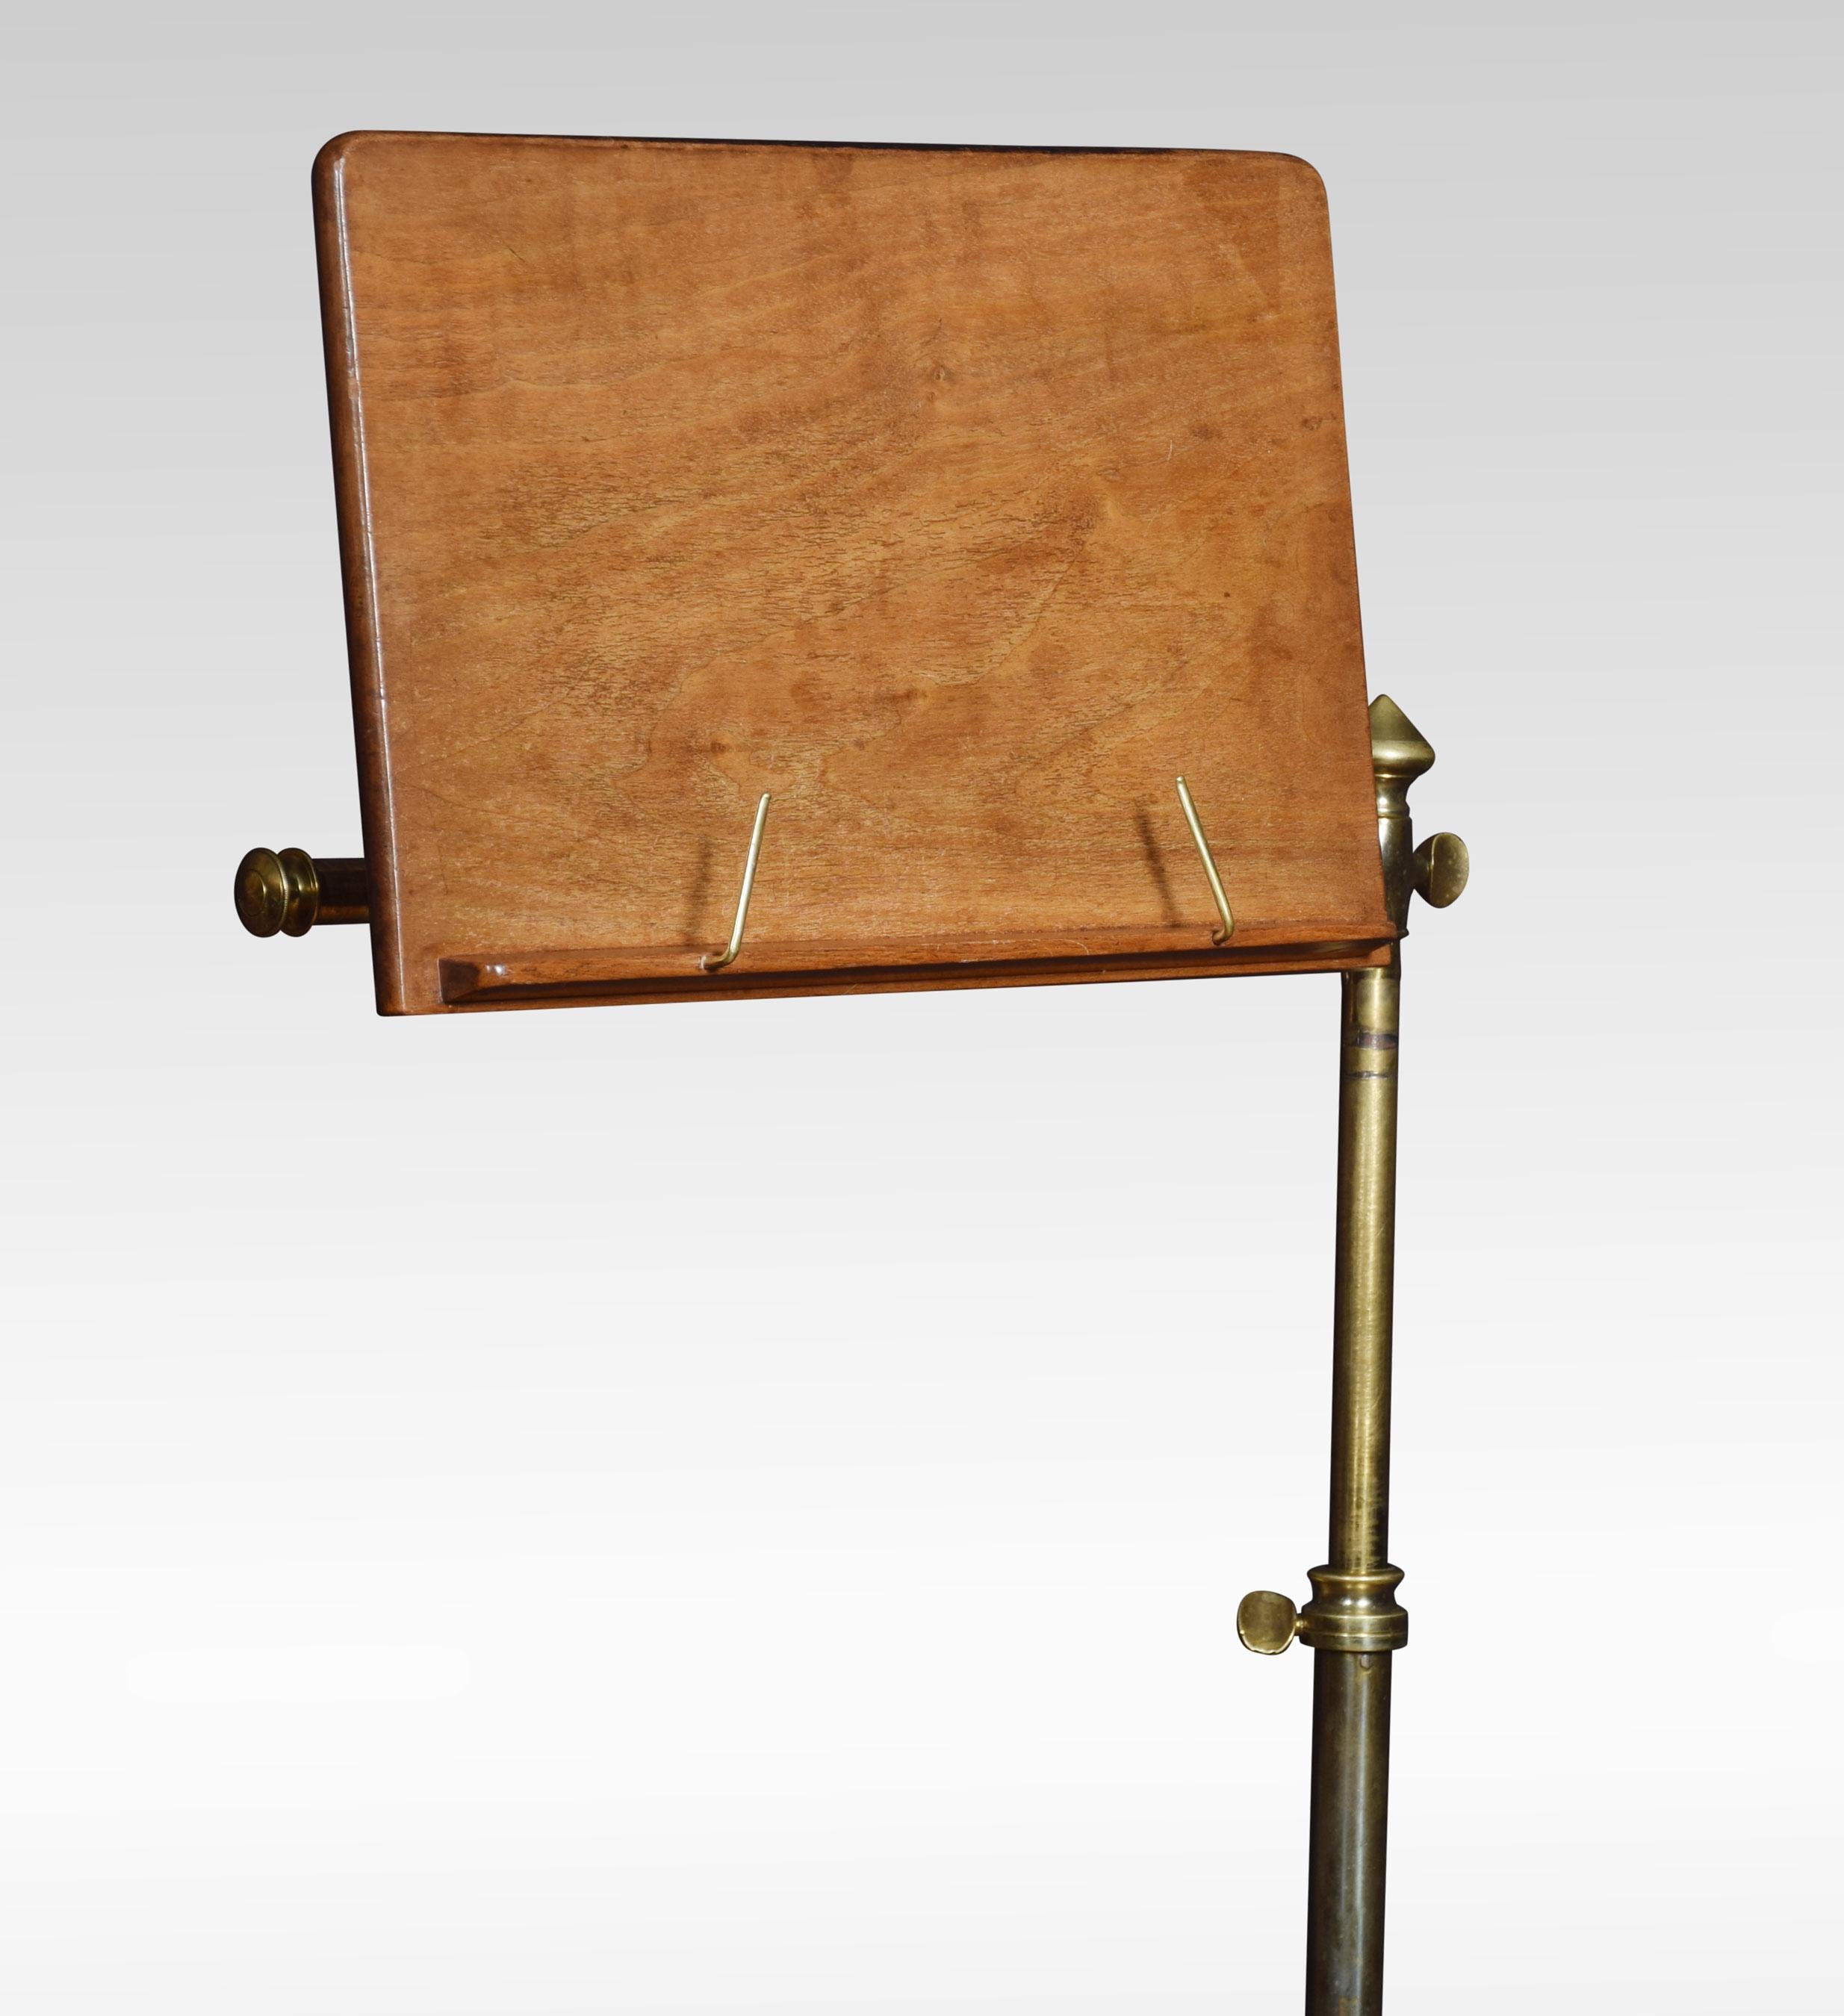 19th century music stand the mahogany sheet music holder on telescopic brass support. Raised up on four cast-iron paw feet.
Dimensions:
Height 43.5 inches adjustable
Width 17.5 inches
Depth 17.5 inches.